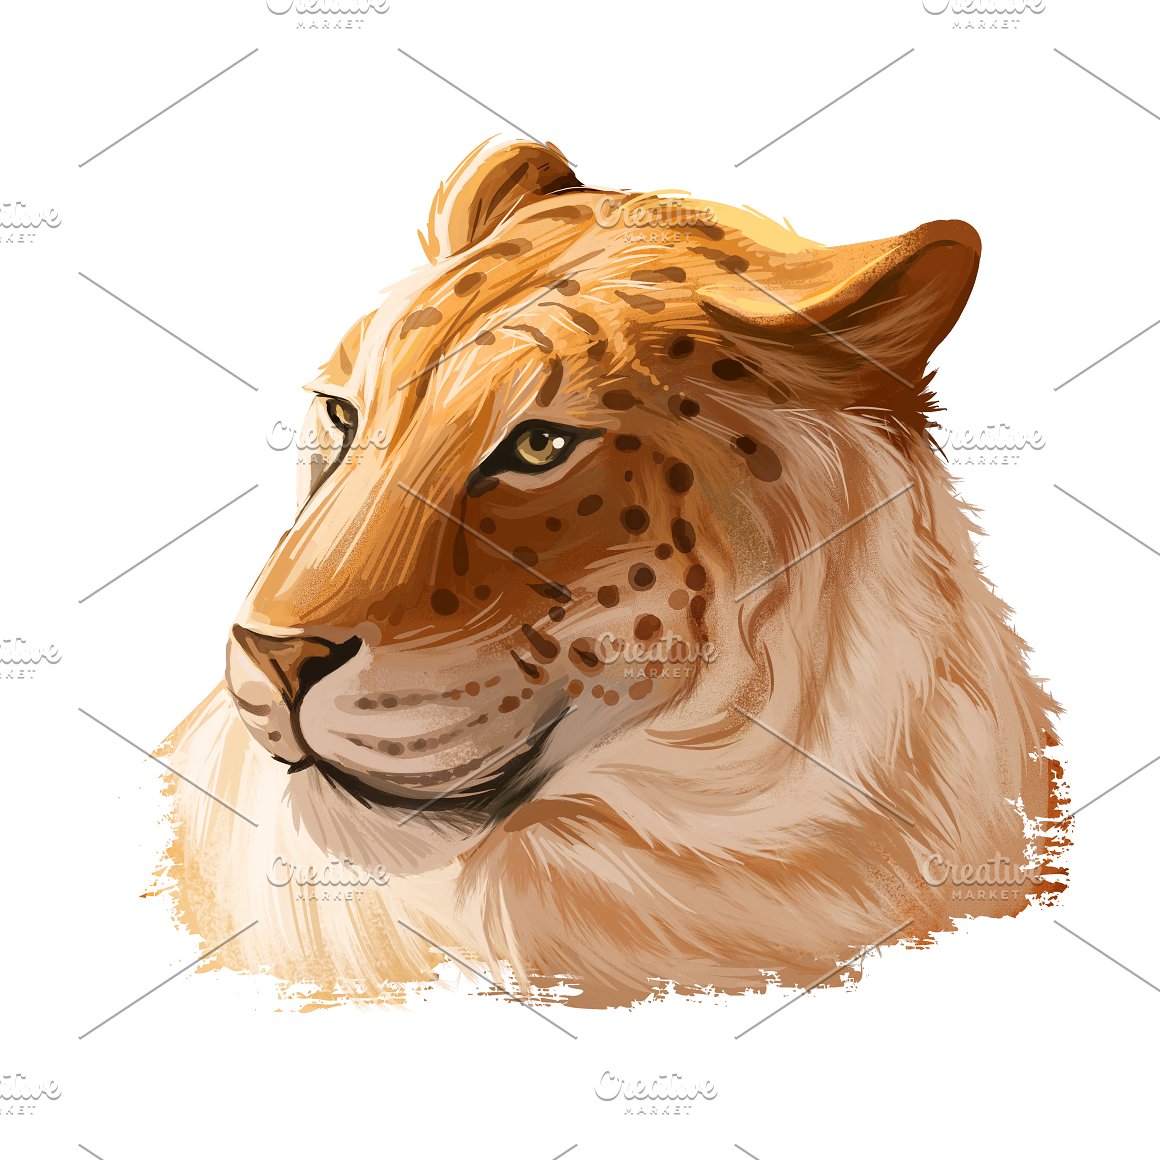 Image of a lioness.